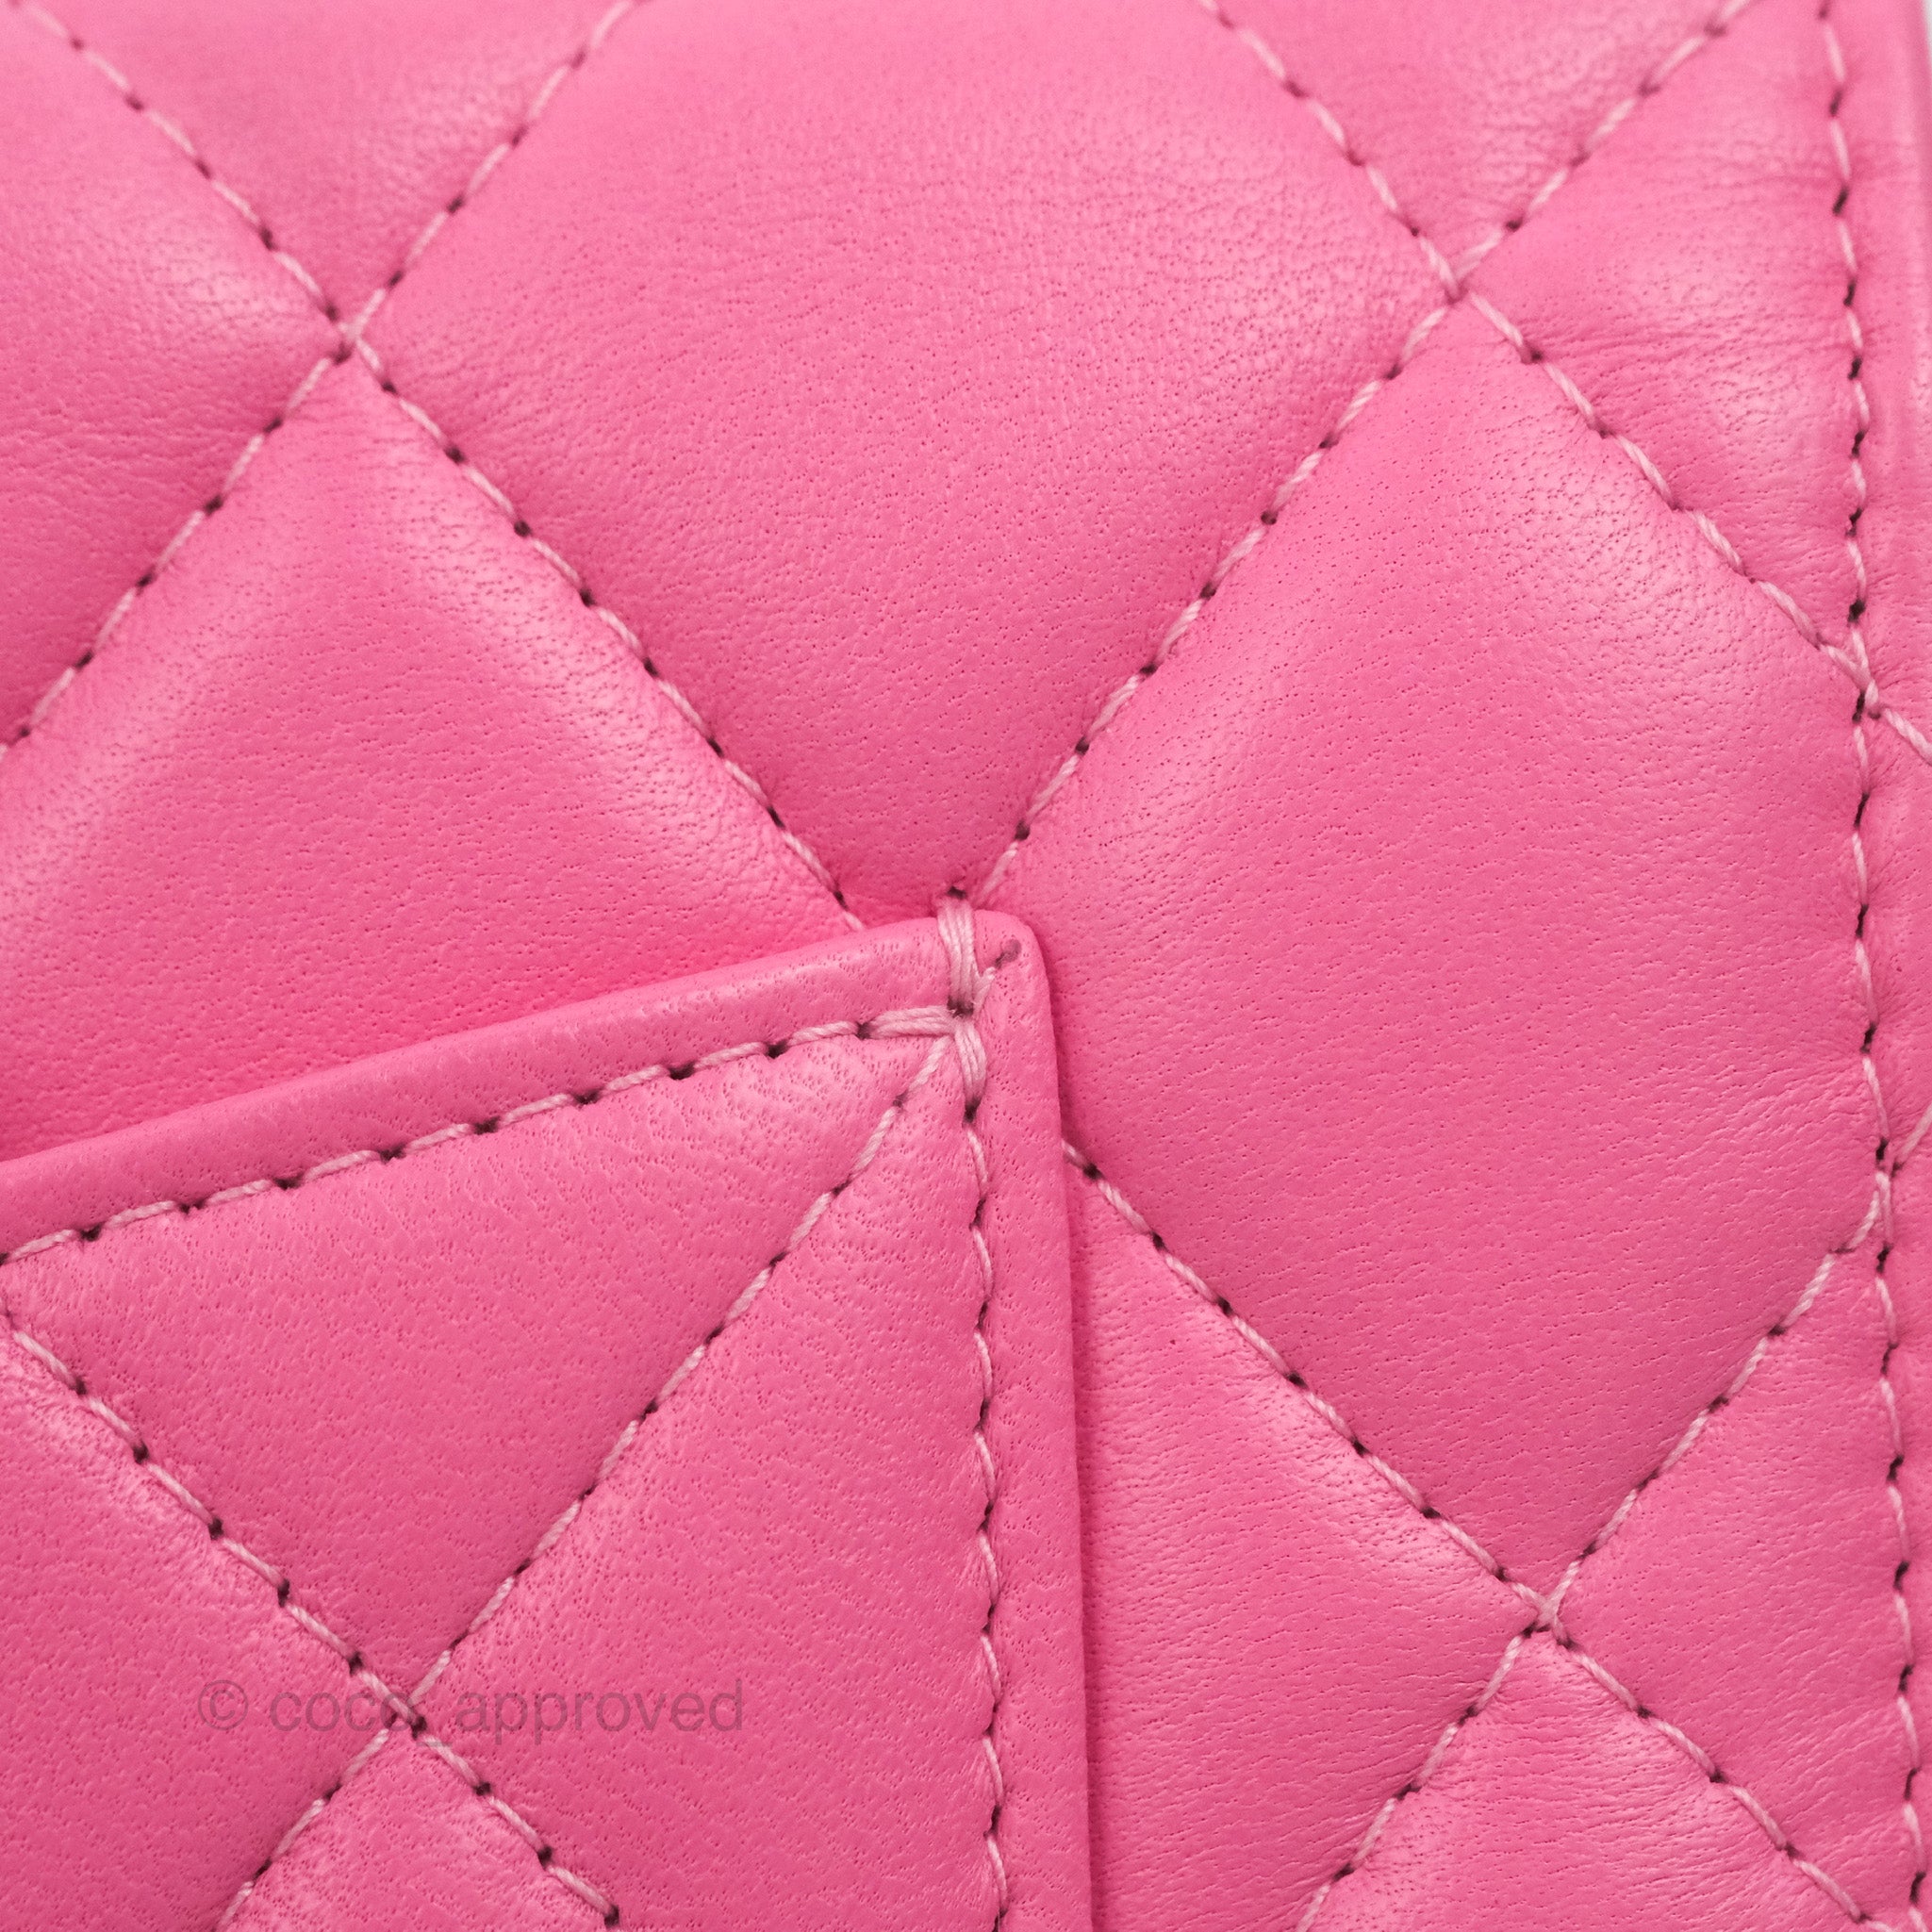 Chanel Quilted Pearl Crush Wallet on Chain WOC Pink Lambskin Aged Gold – Coco  Approved Studio